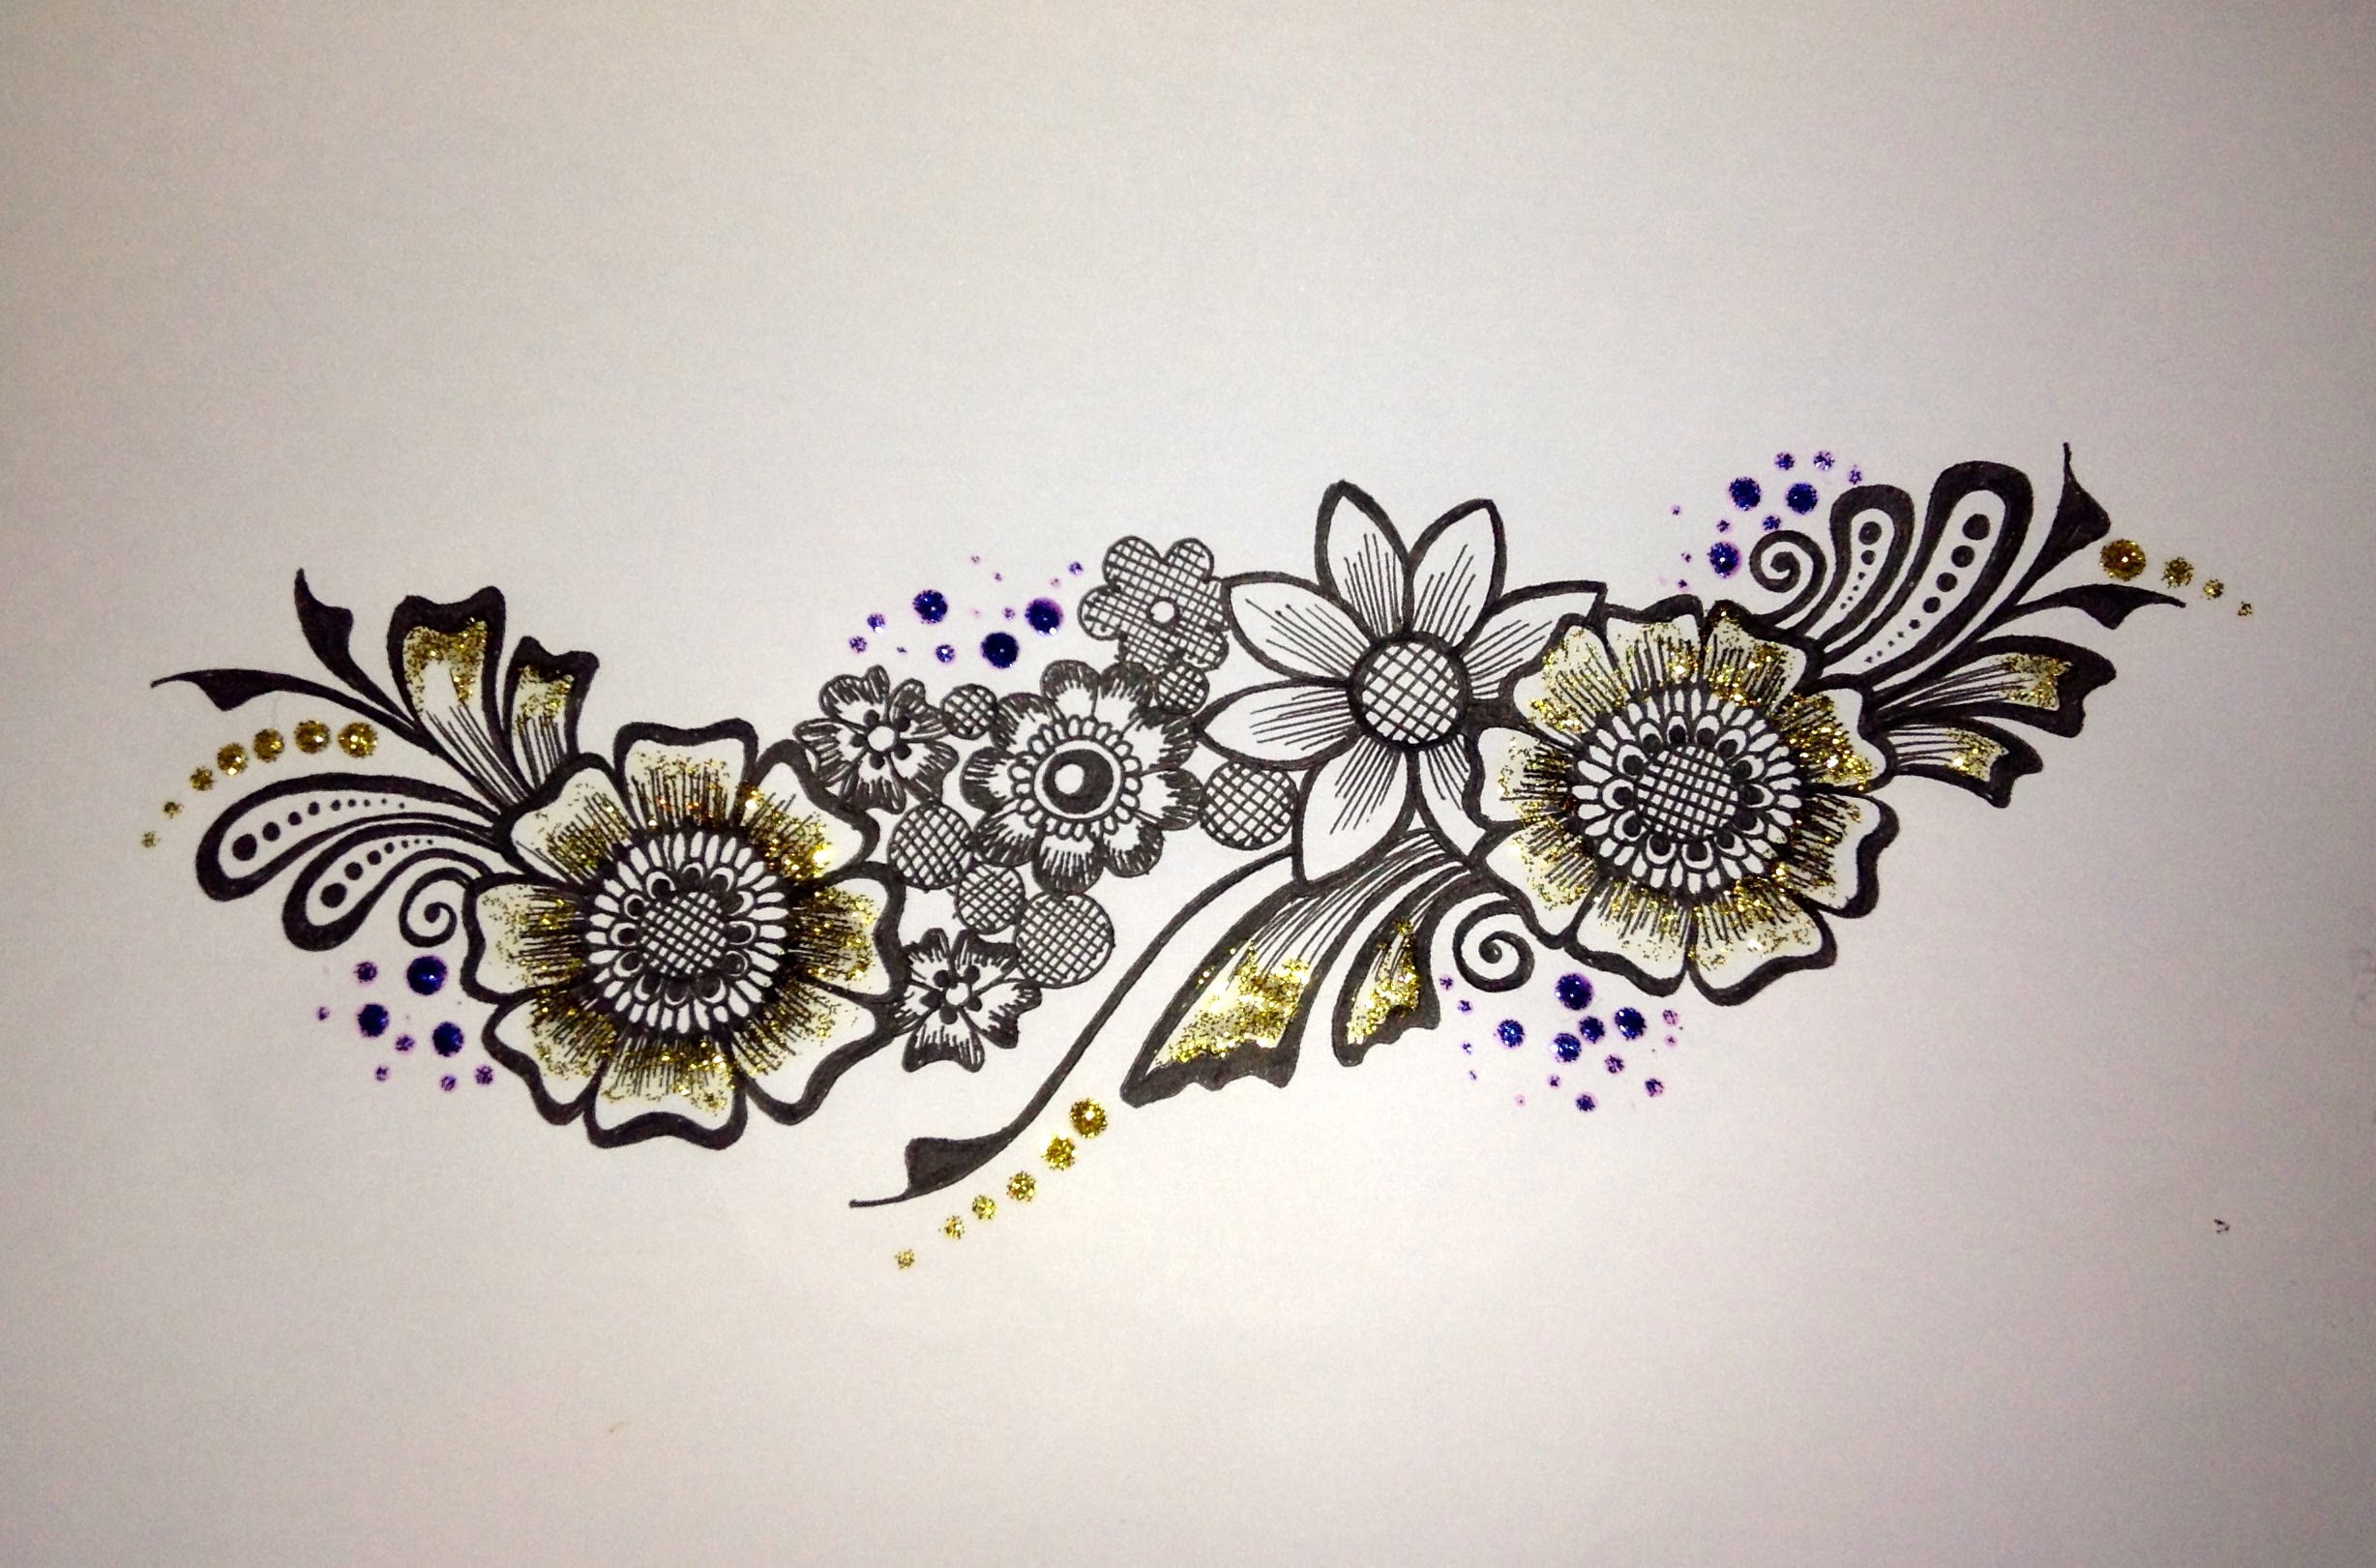 Simple Designs To Draw On Paper / Flower Design Drawing At Getdrawings